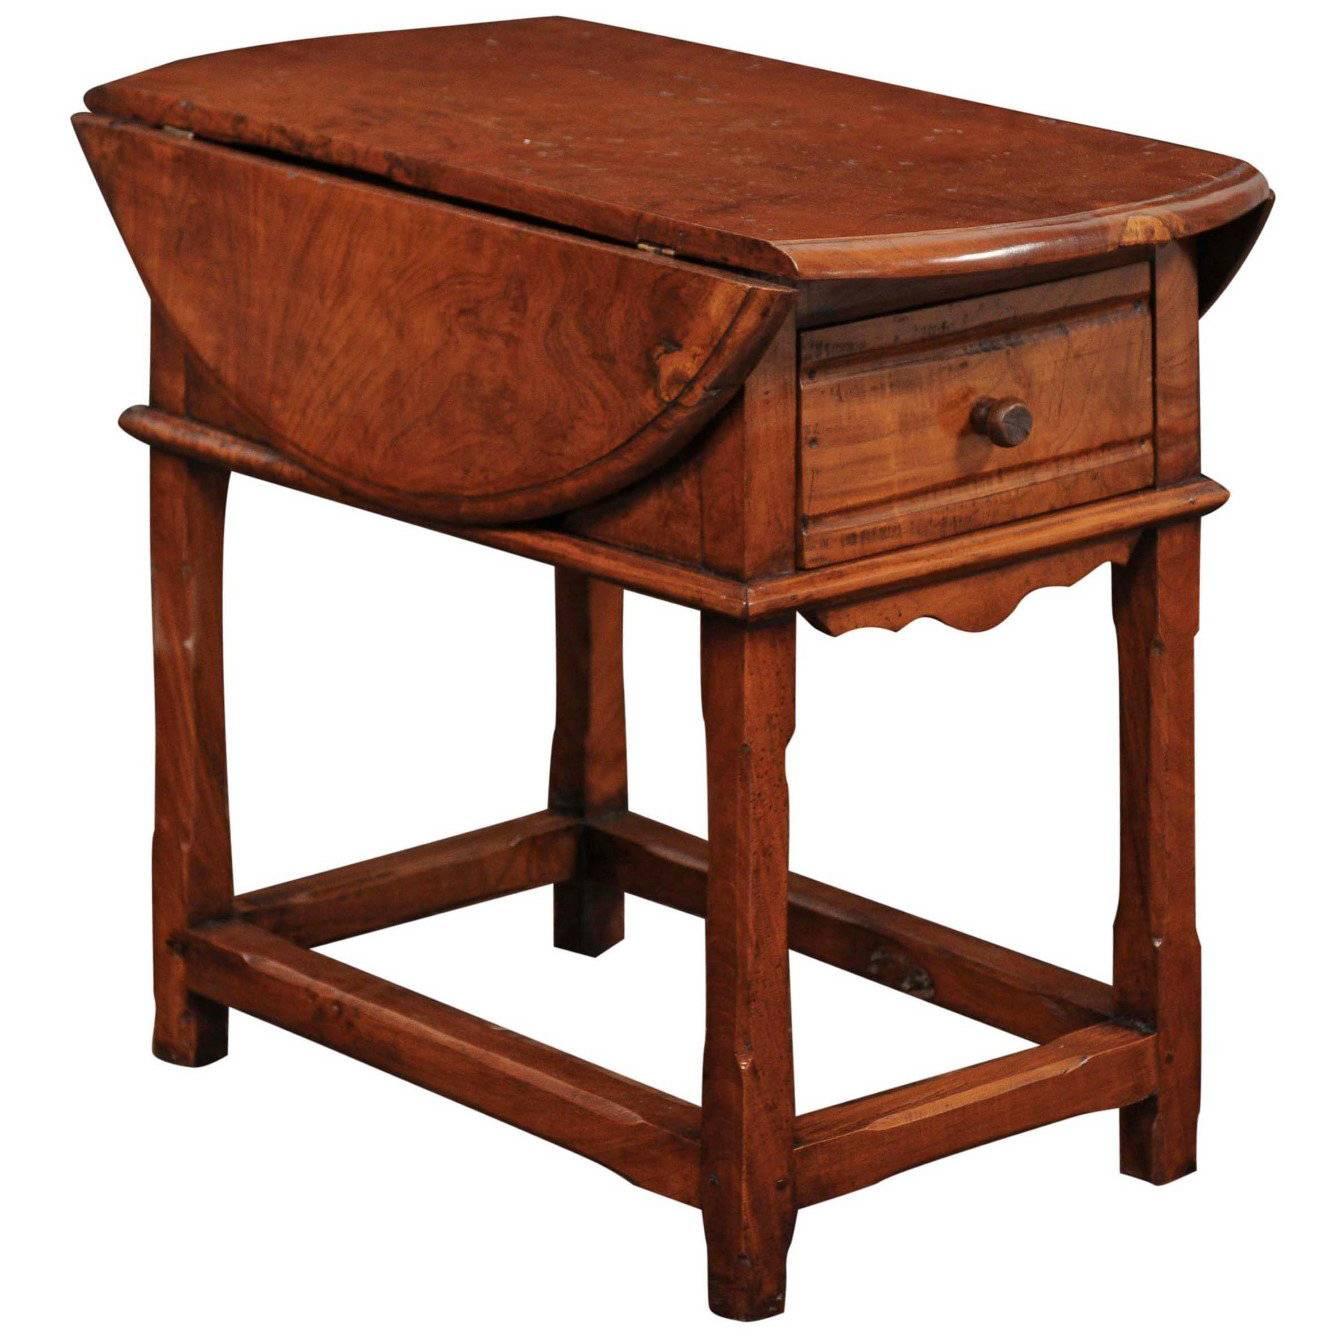 English Drop-Leaf Yew Wood Side Table with Single Drawer and Side Stretcher